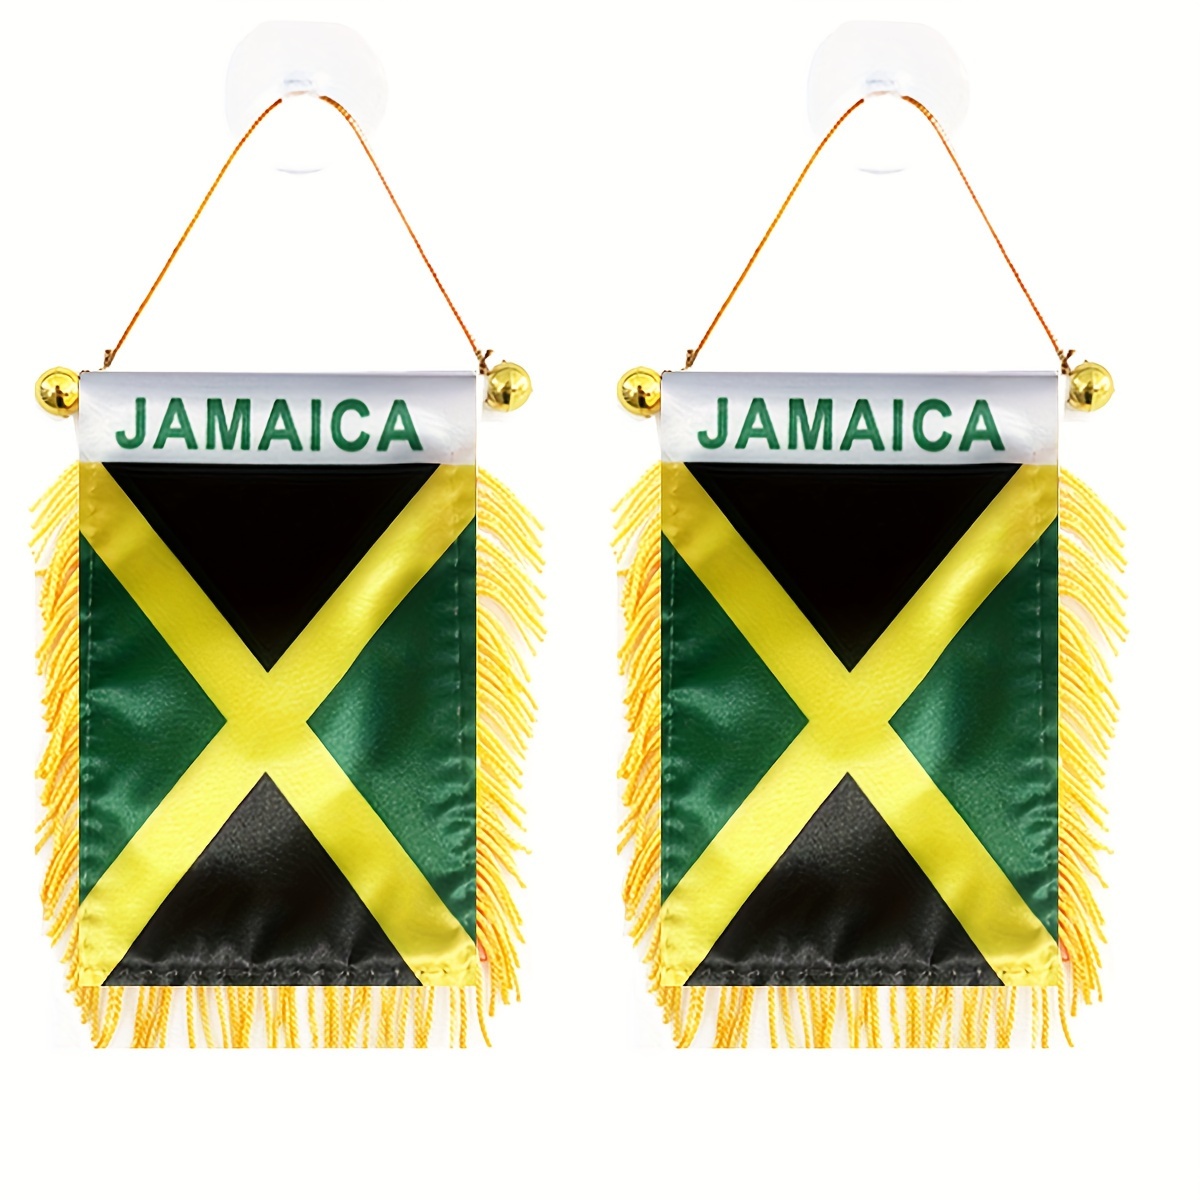 

2pcs, Jamaica Window Hanging Flag Jam Jm Flag 3x4 Inch 8x12cm Double Side Mini Flag Banner Car Rearview Mirror Decor Fringed Hanging Flag With Suction Cup